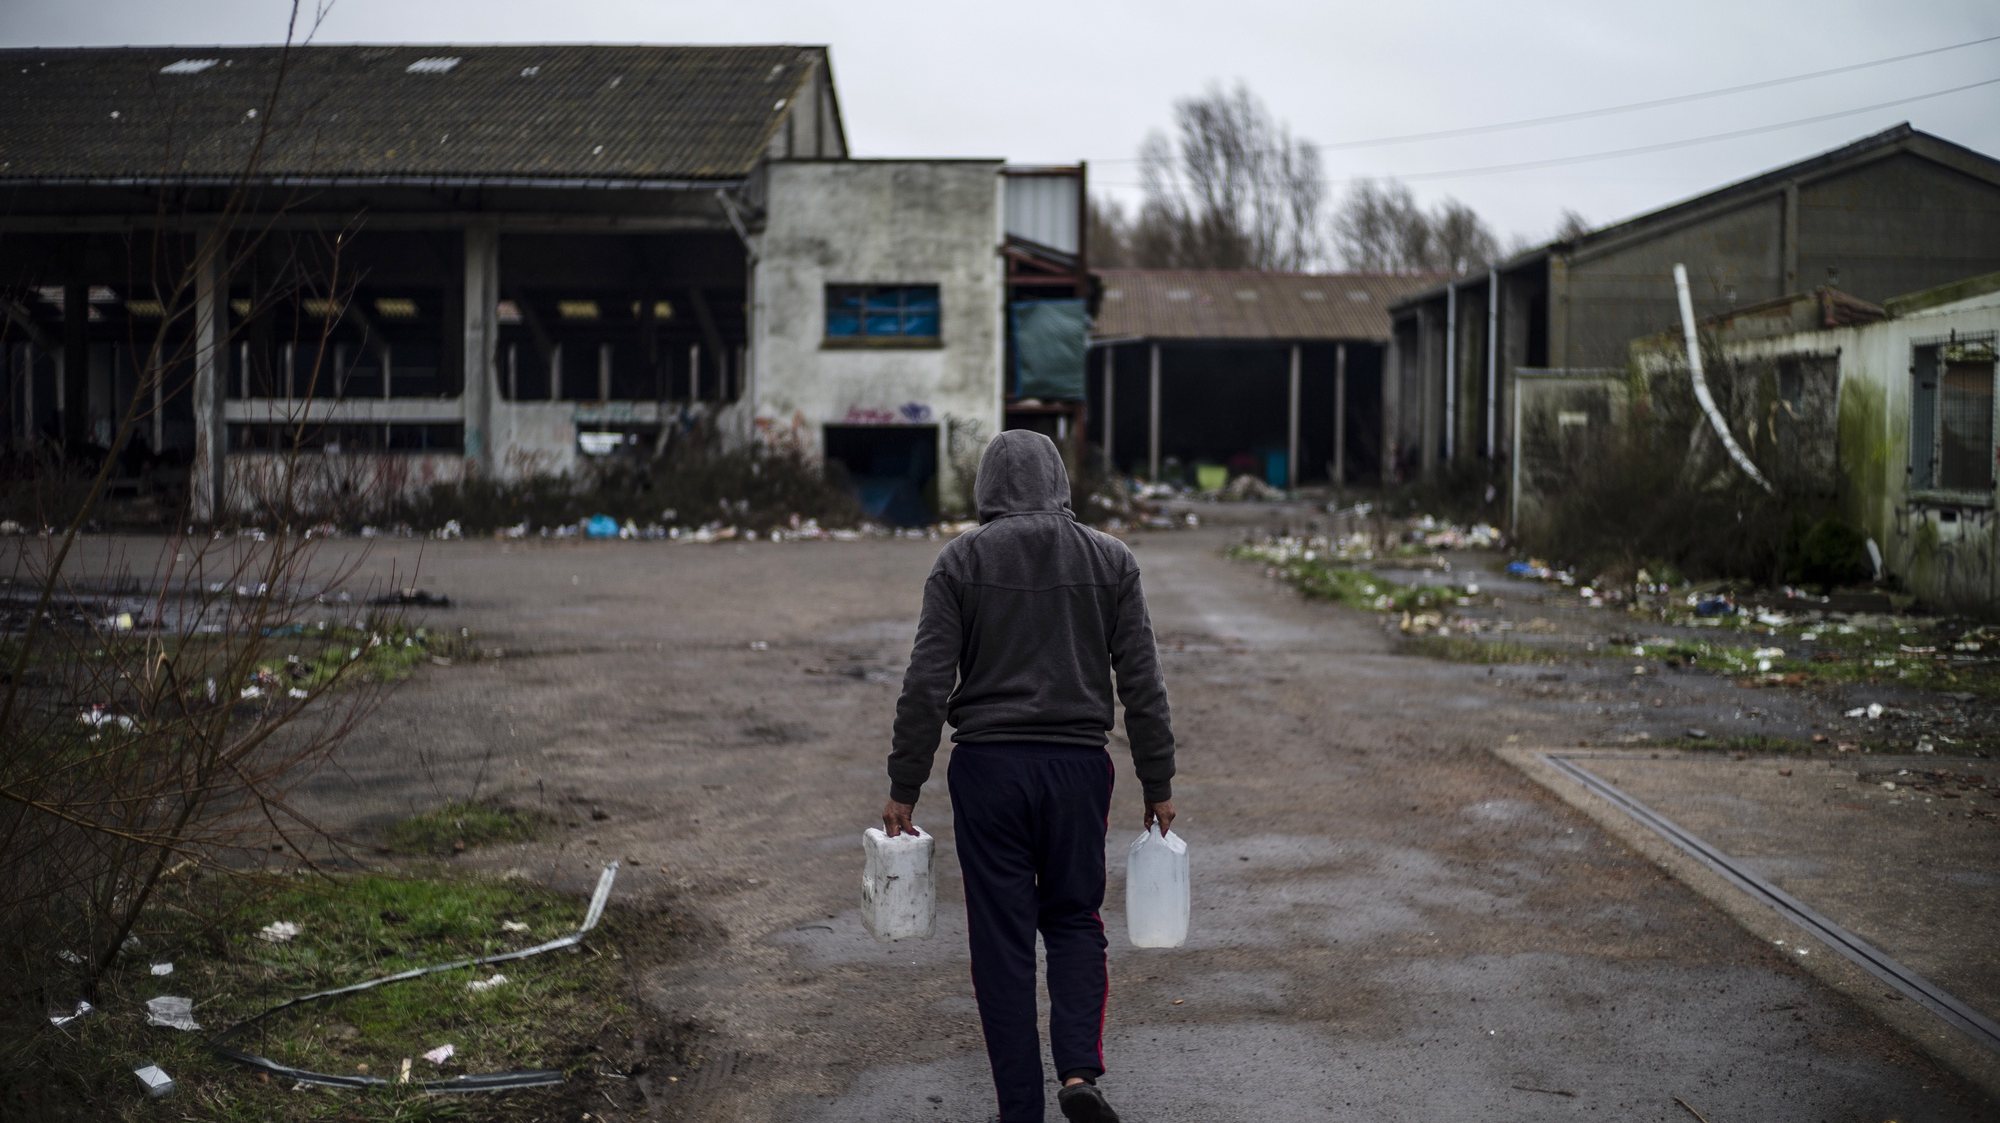 epa08179161 A refugee carries water inside the makeshift migrant camp in Grande-Synthe, near Dunkerque, France, 30 January 2020. The camp in Grande-Synthe counts an estimated 500 residents mostly composed of Kurds from Iraq. They are still hoping to reach United Kingdom even if Britain is due to leave the European Union on 31 January 2020.  EPA/YOAN VALAT